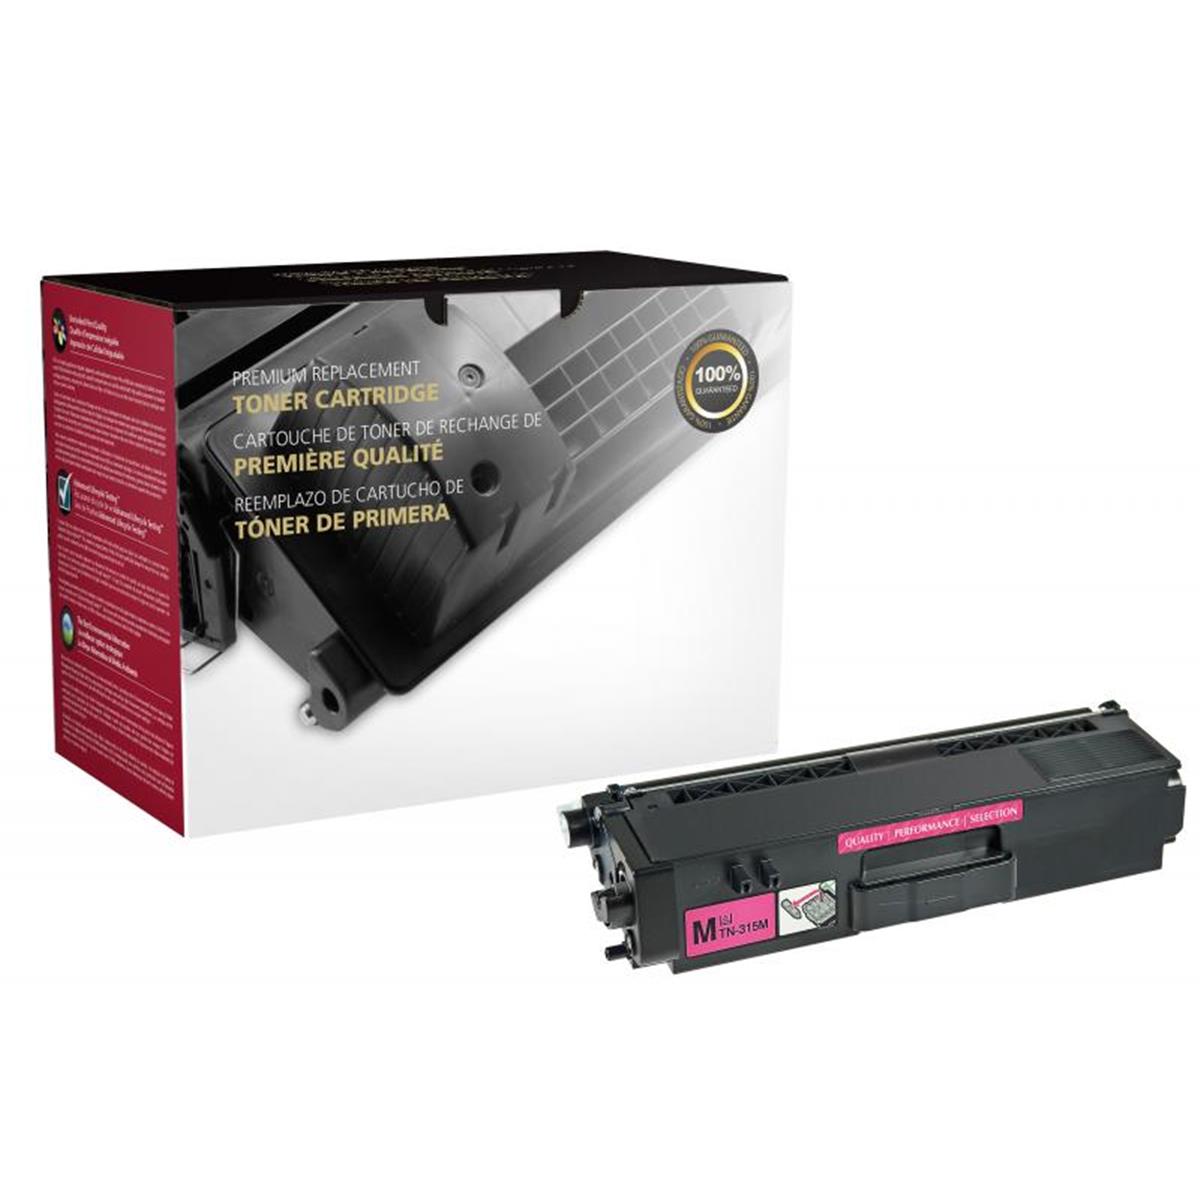 Picture of Brother 200447 High Yield Magenta Toner Cartridge for TN315